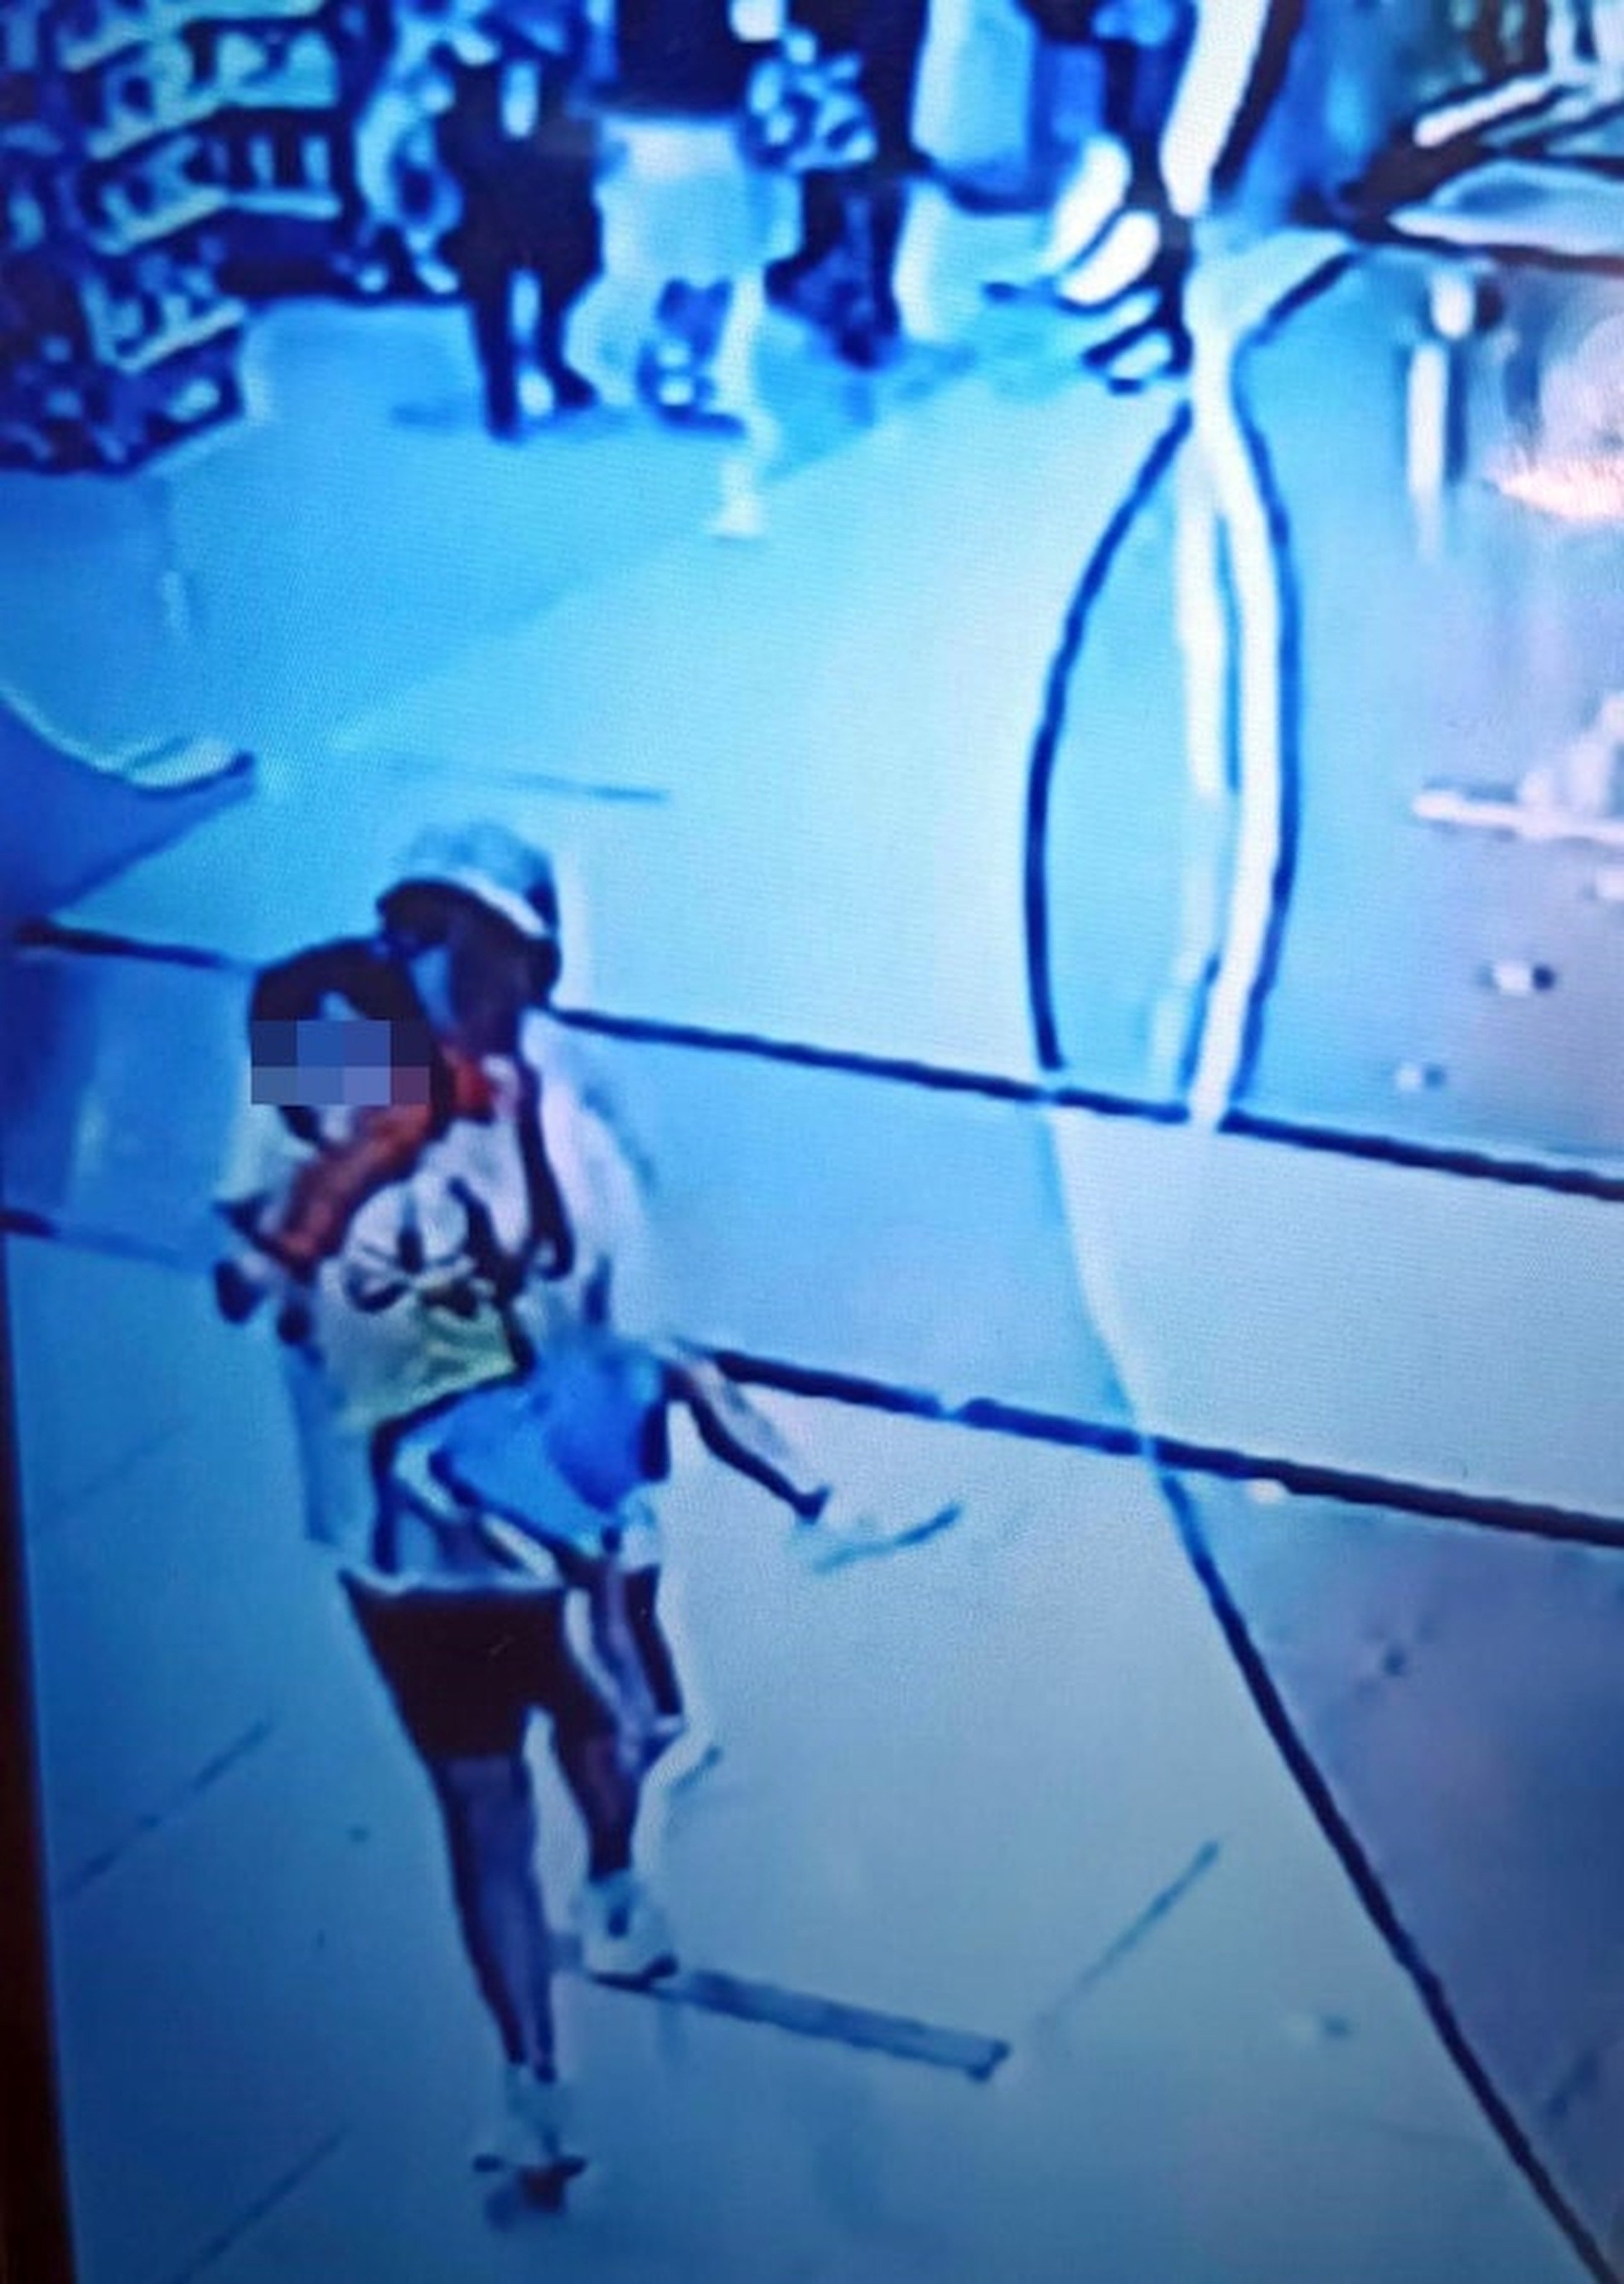 A CCTV image of a three-year-old boy being snatched from a Hong Kong shopping centre. Photo: FACEBOOK/ Vanessa Chan